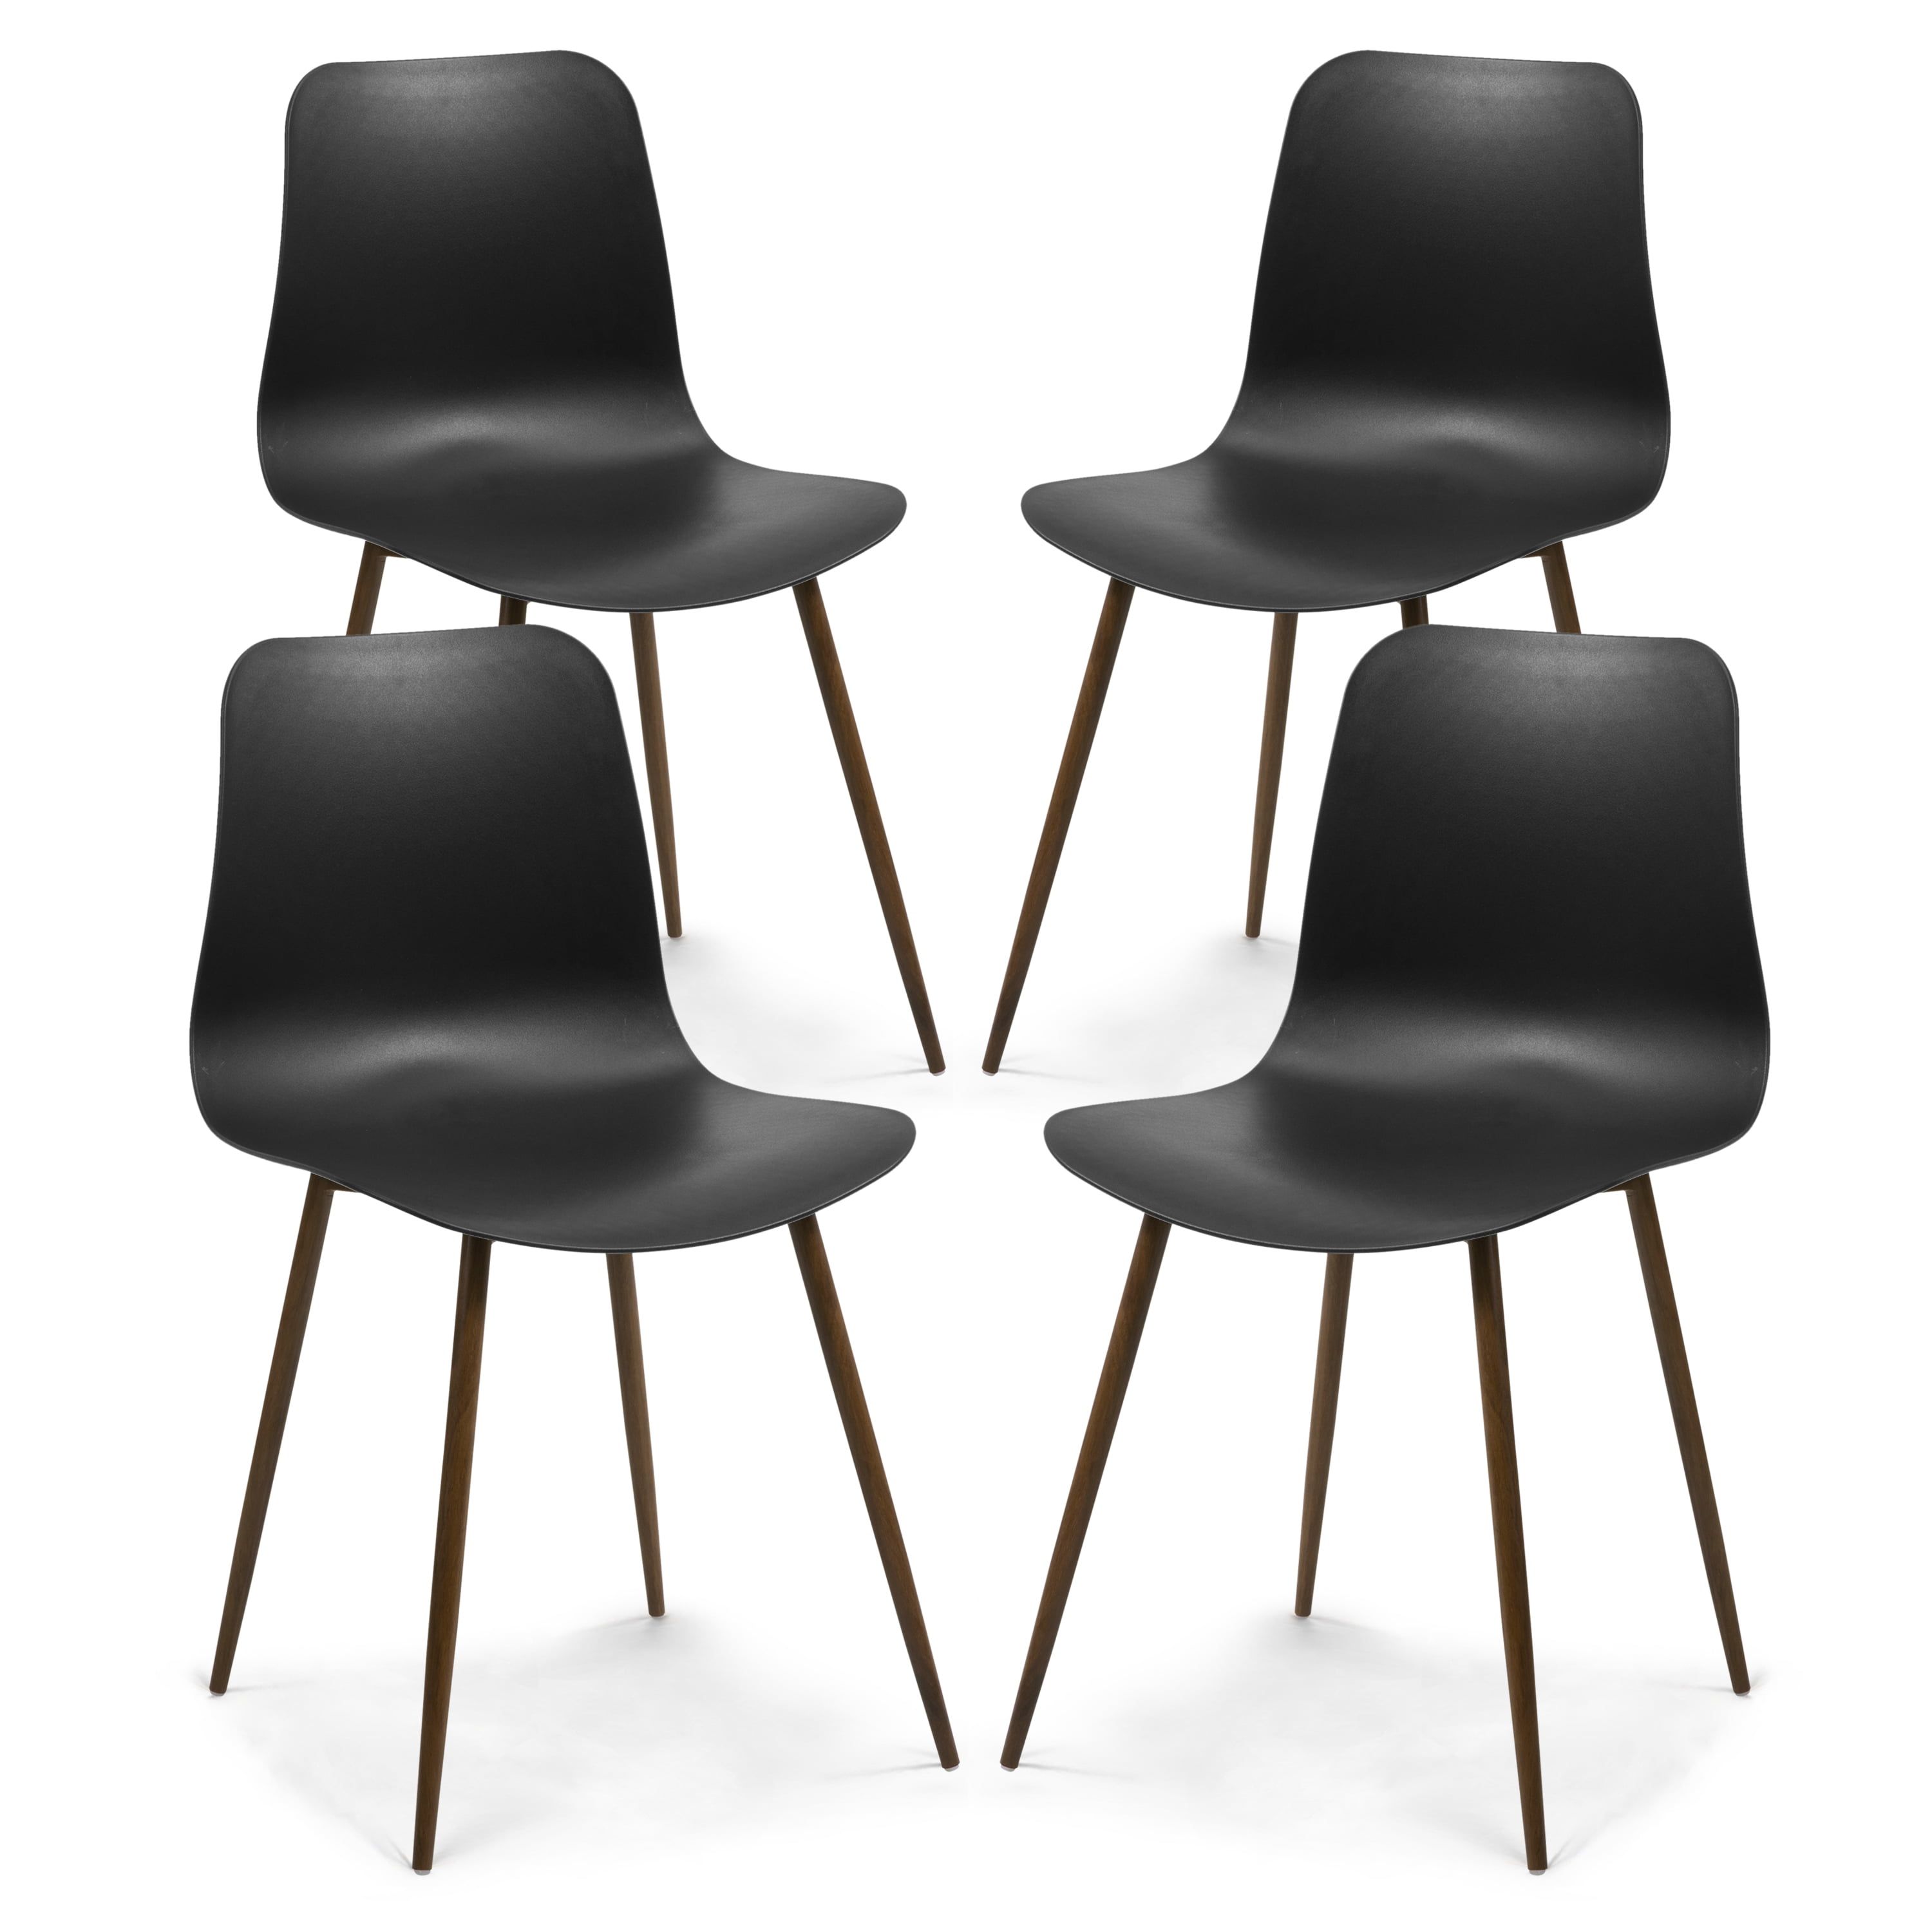 Set of 4 Poly and Bark Landon Contemporary Kitchen Dining Sculpted Mid-Century Side Chair in Black